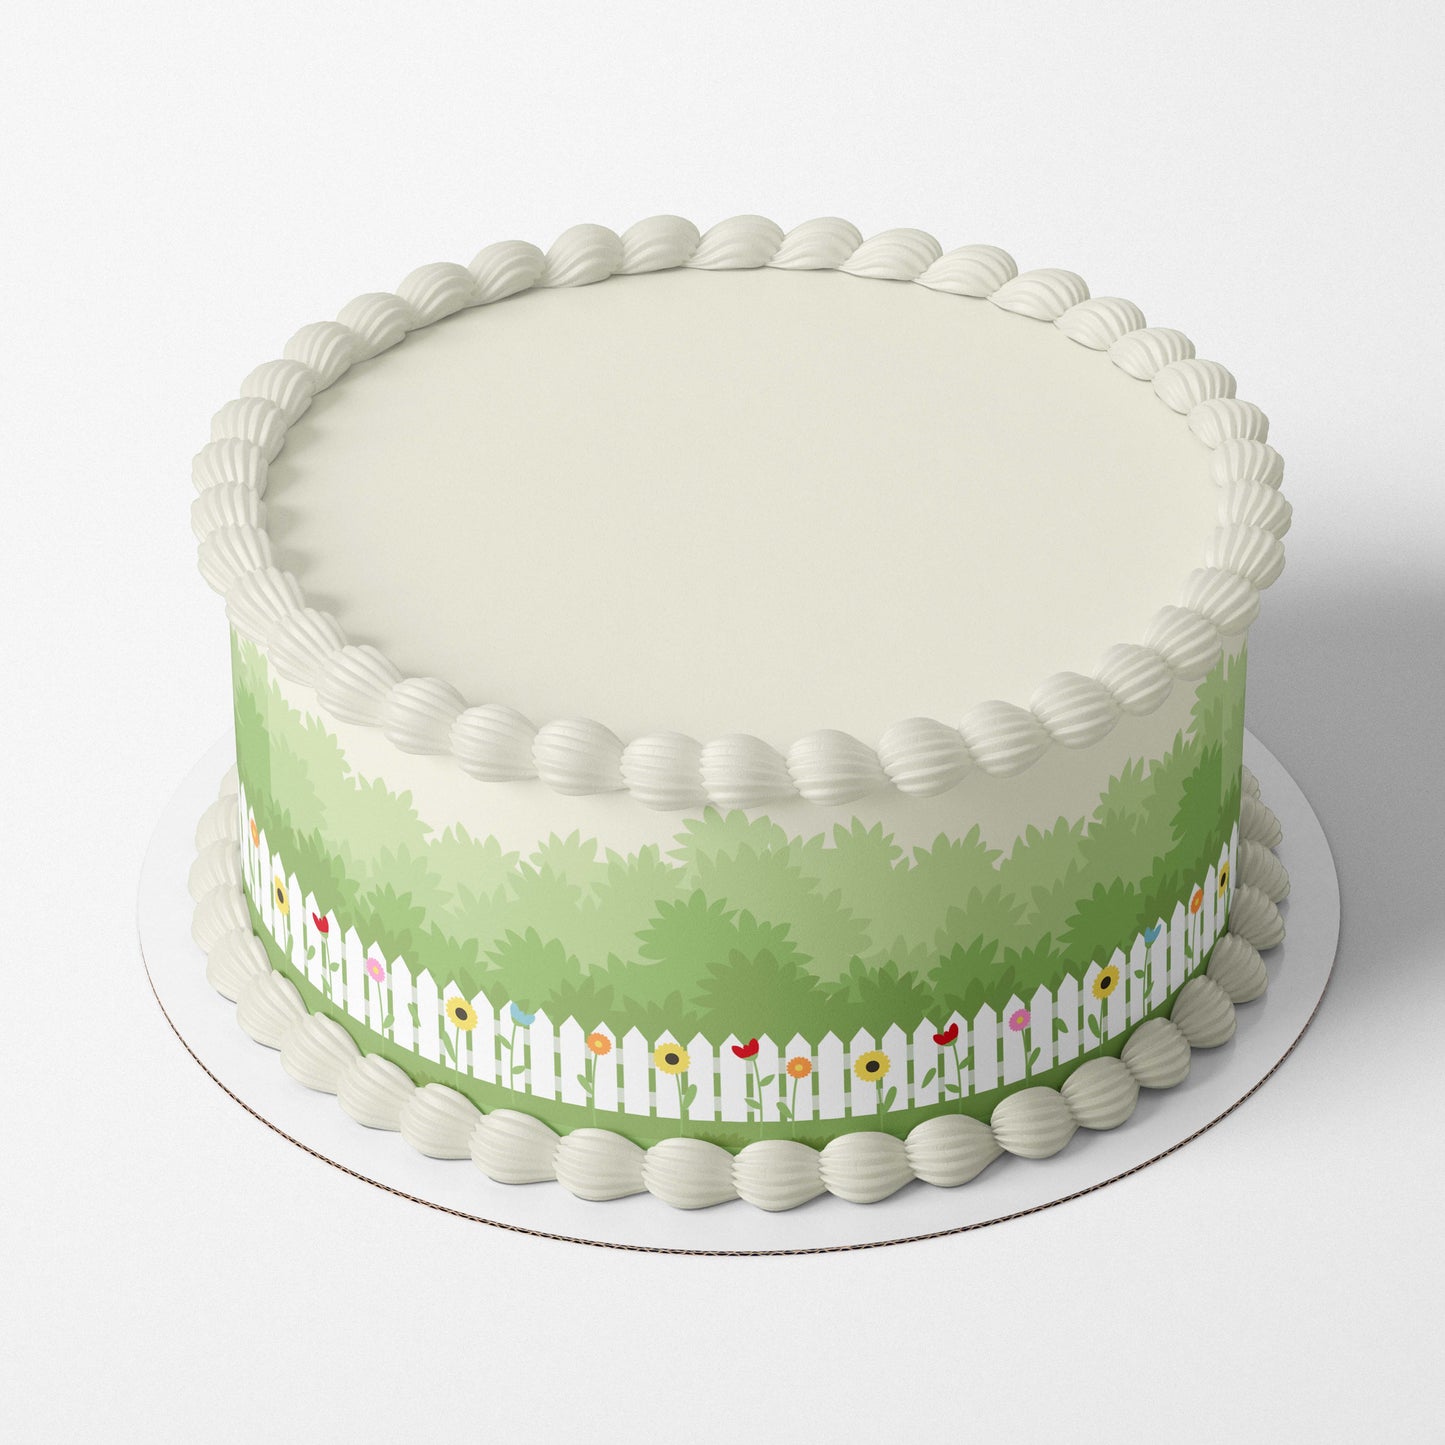 Flower Garden - Edible Icing Cake Wrap. Add this beautiful flower garden print with a white picket fence on cakes or any sweet treats. Perfect for a fairy garden or gardening theme party.